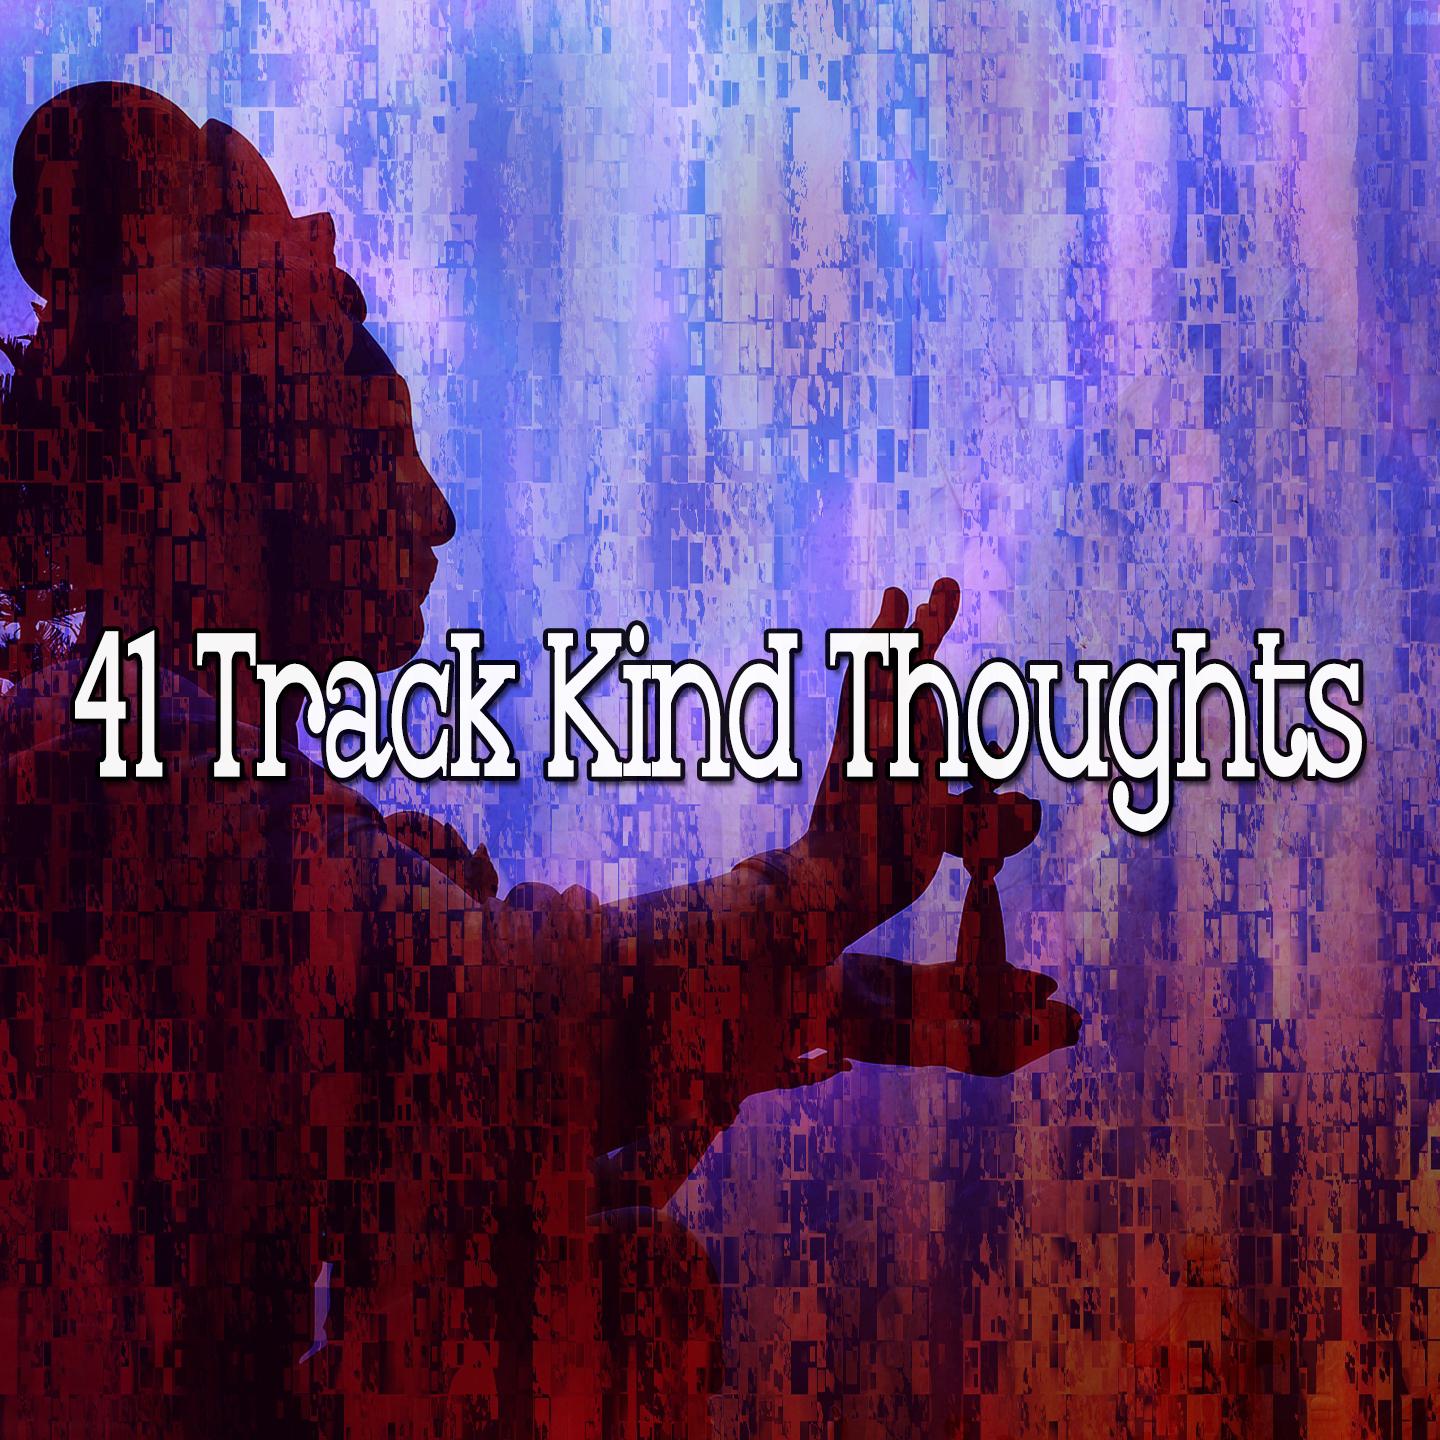 41 Track Kind Thoughts